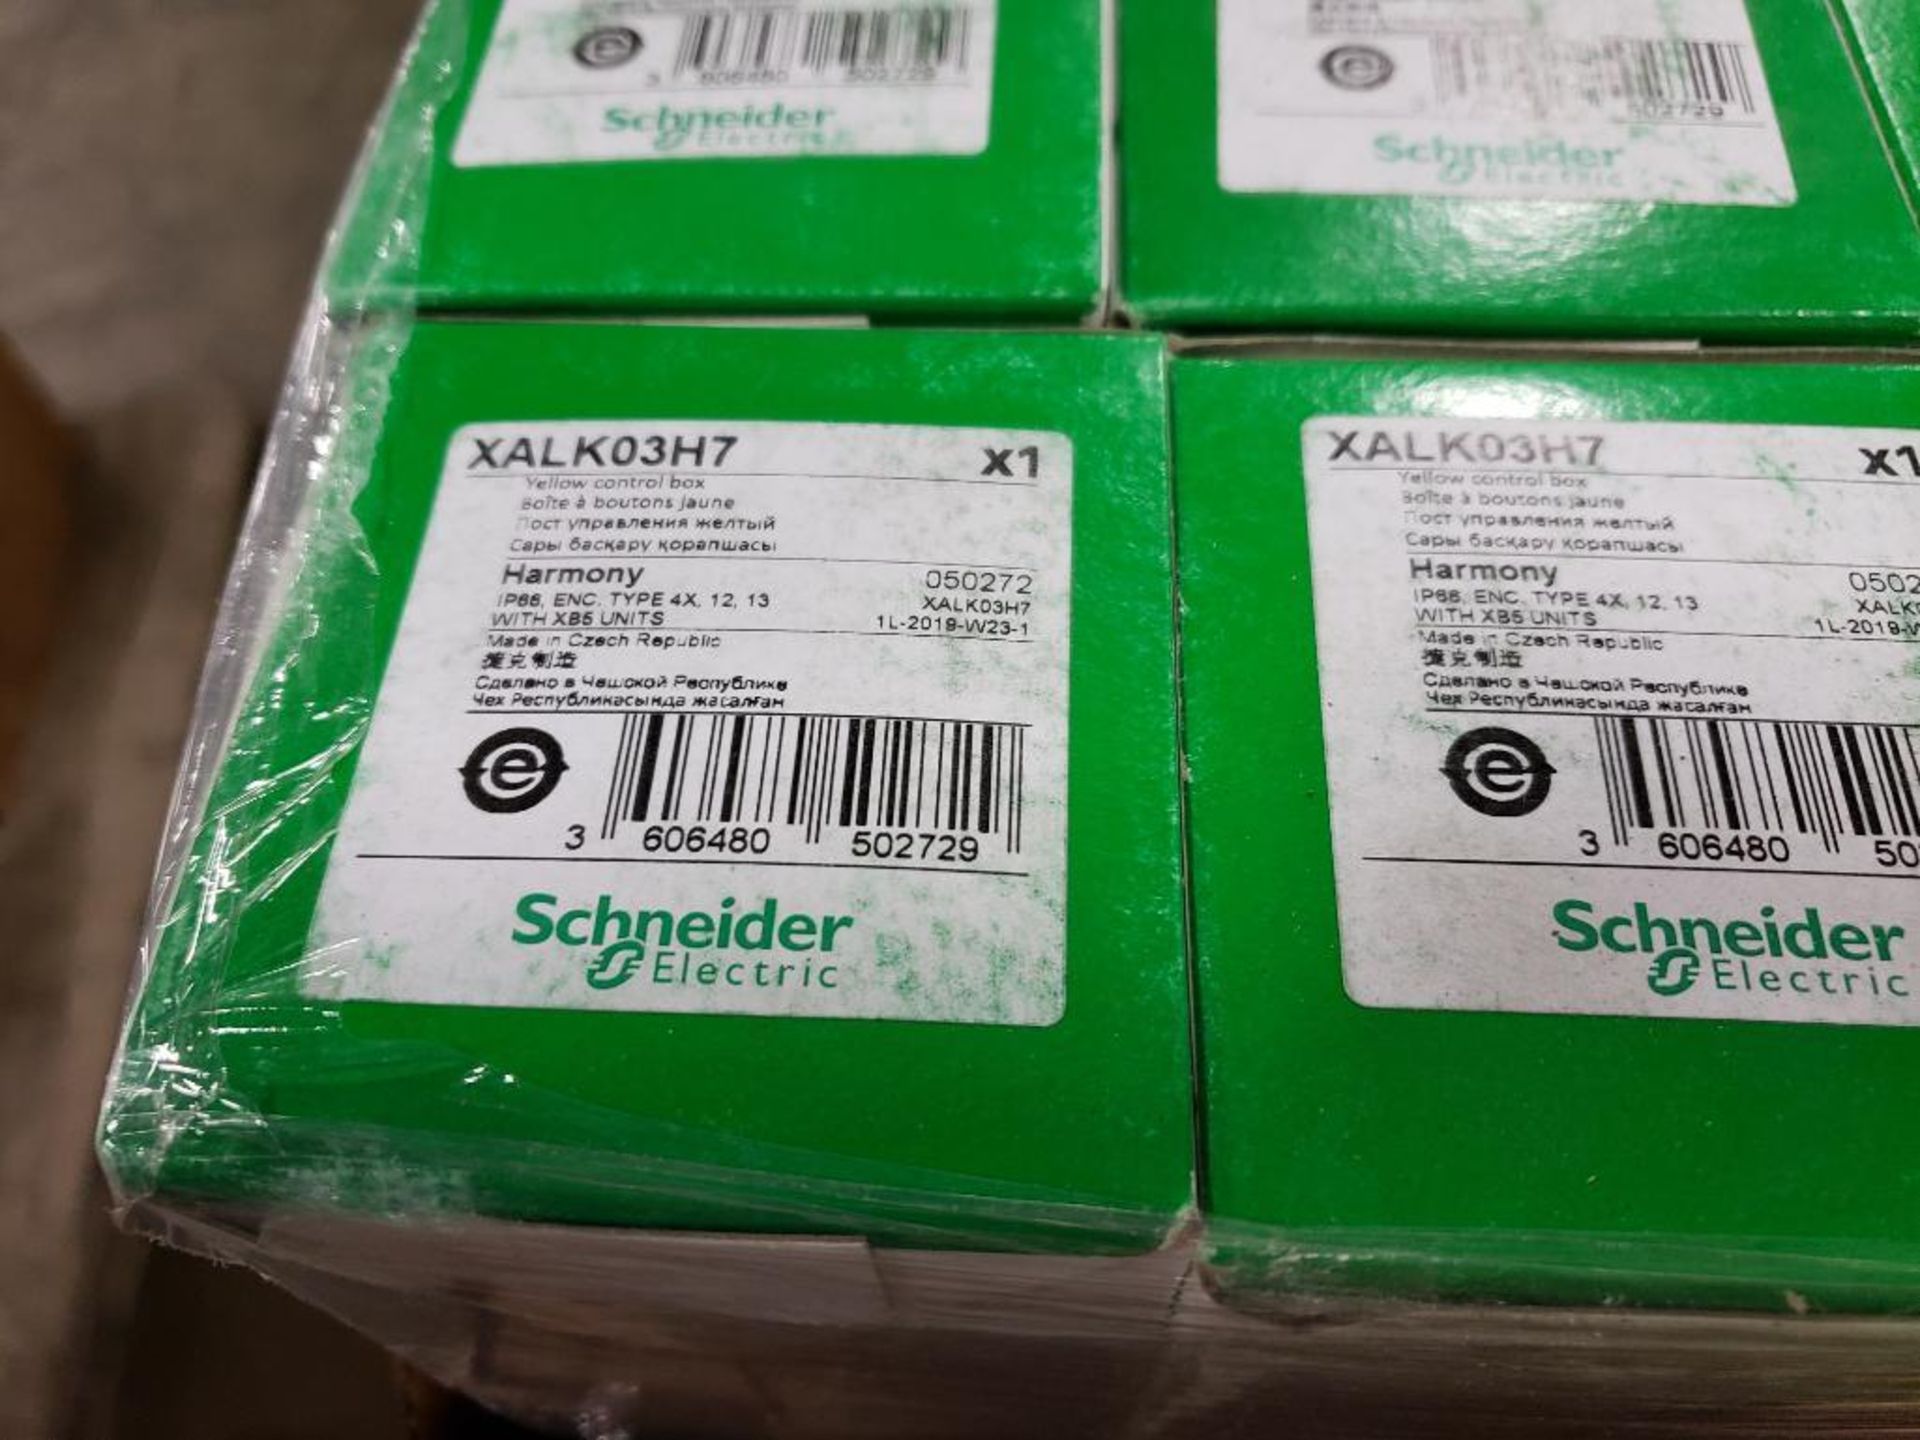 Qty 12 - Schneider Electric XALK03H7 Yellow control box. New in box. - Image 2 of 3